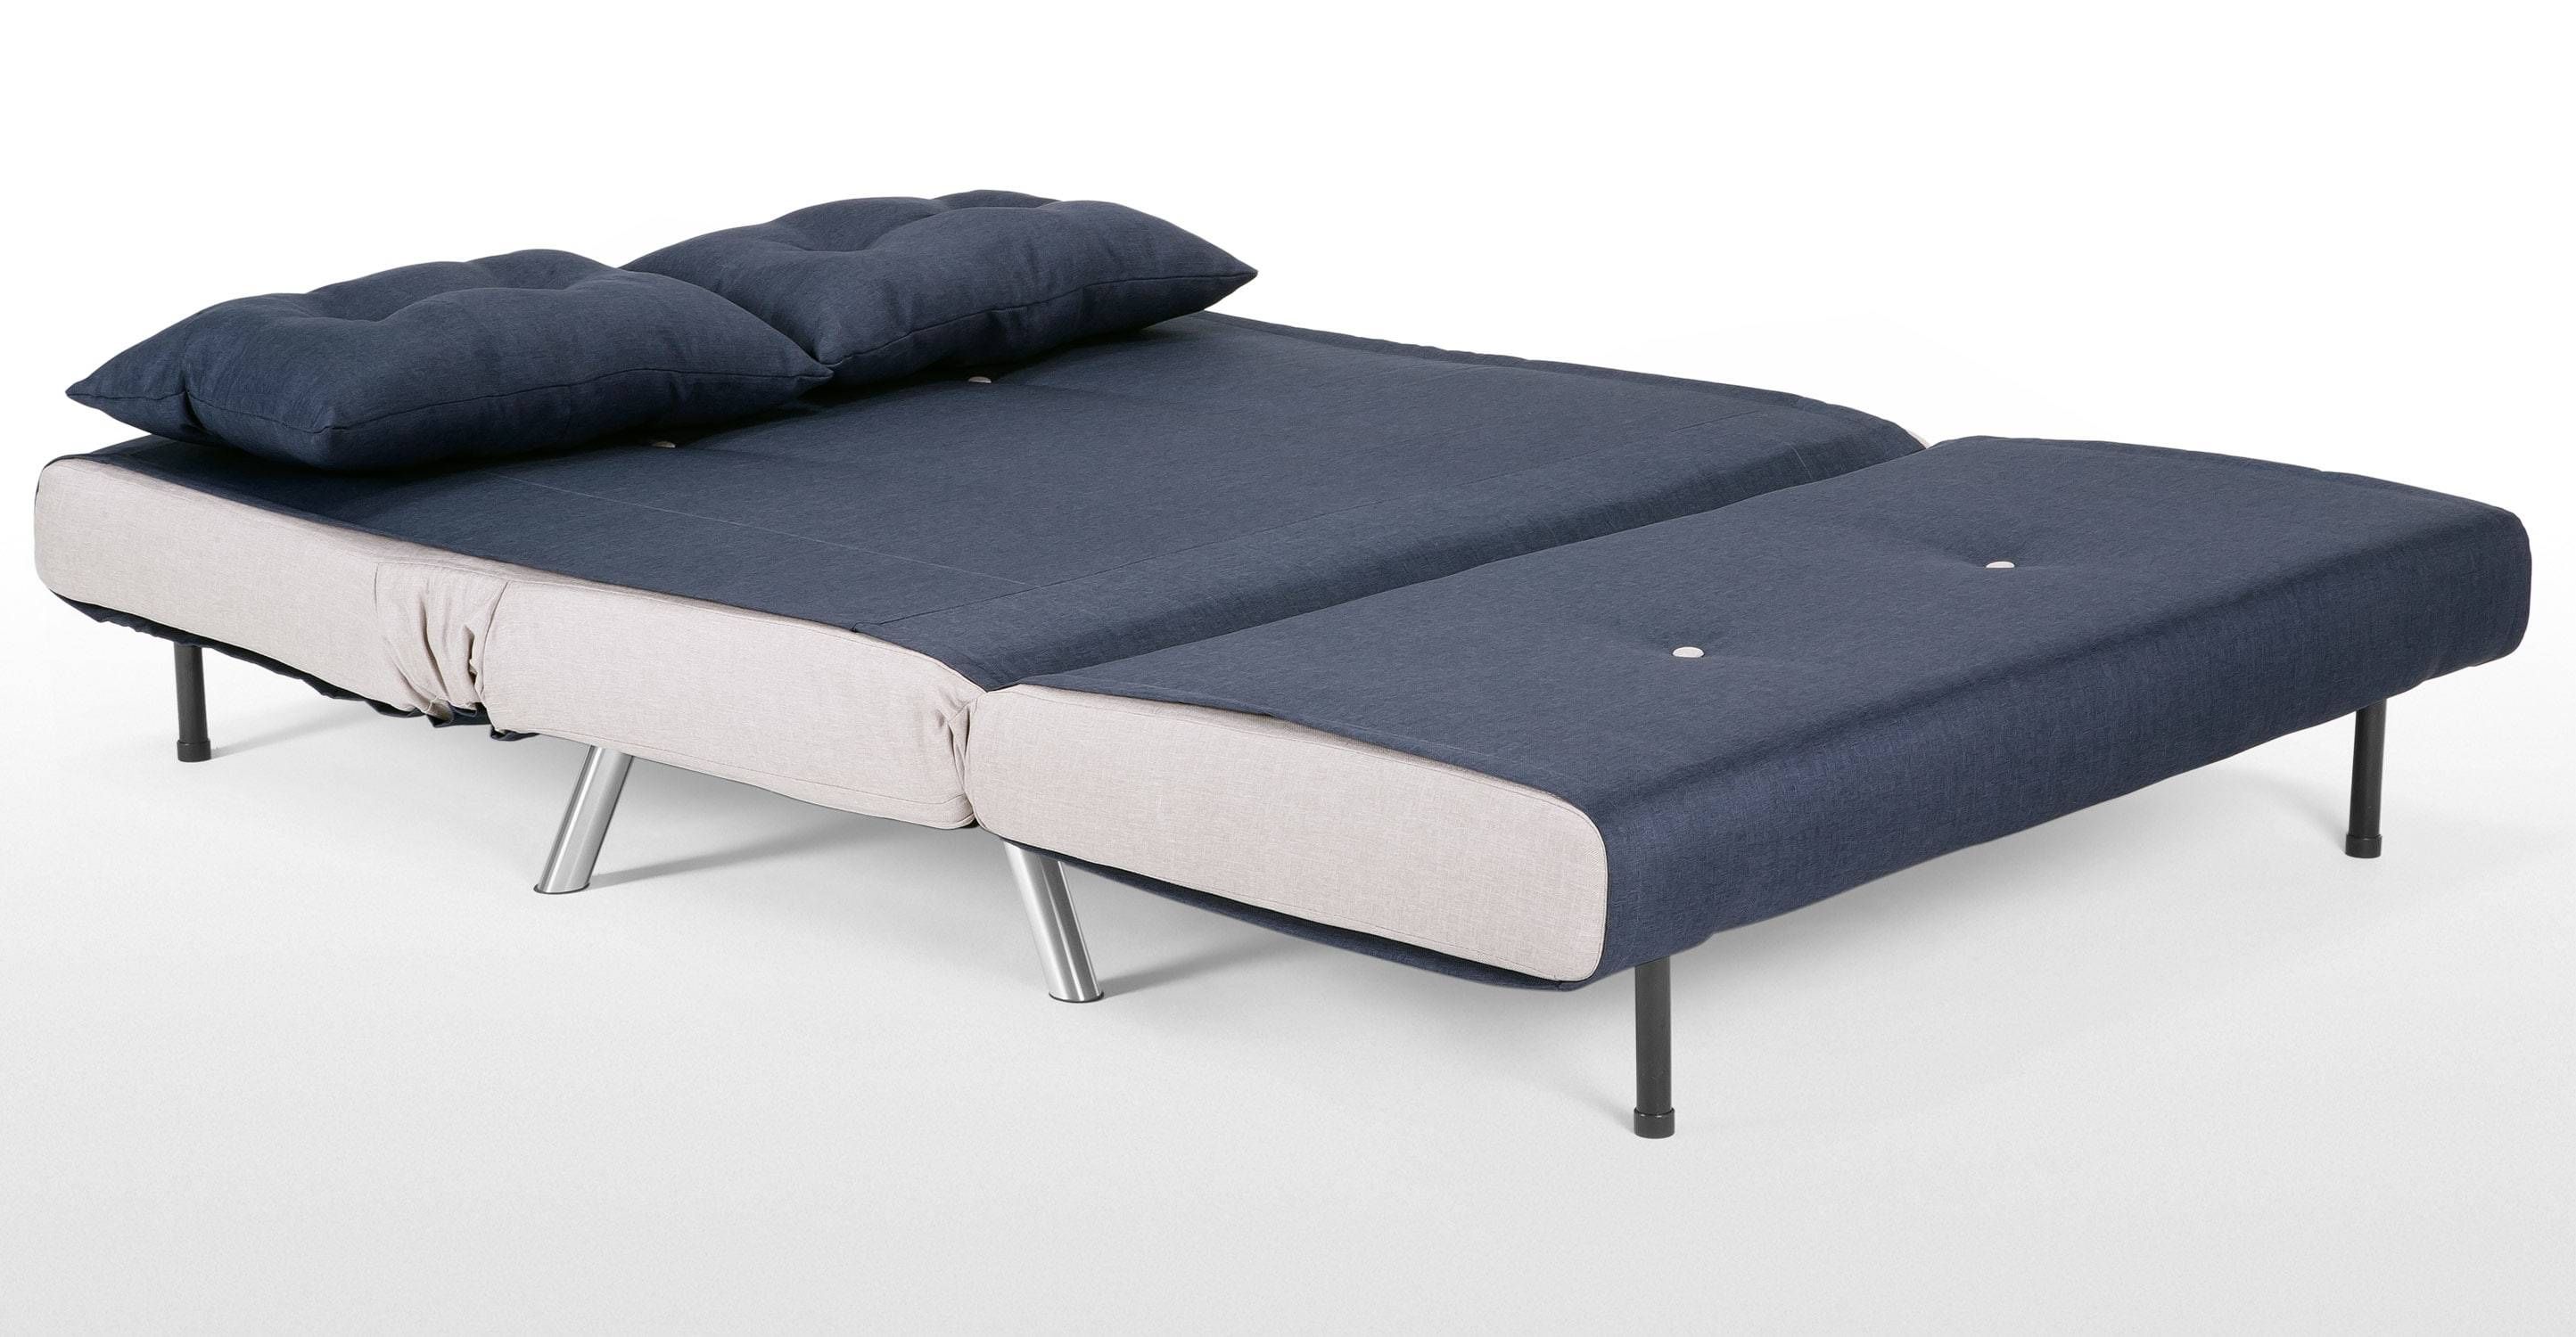 Haru Small Sofa Bed In Quartz Blue | Made Within Sofa Beds Chairs (View 12 of 15)